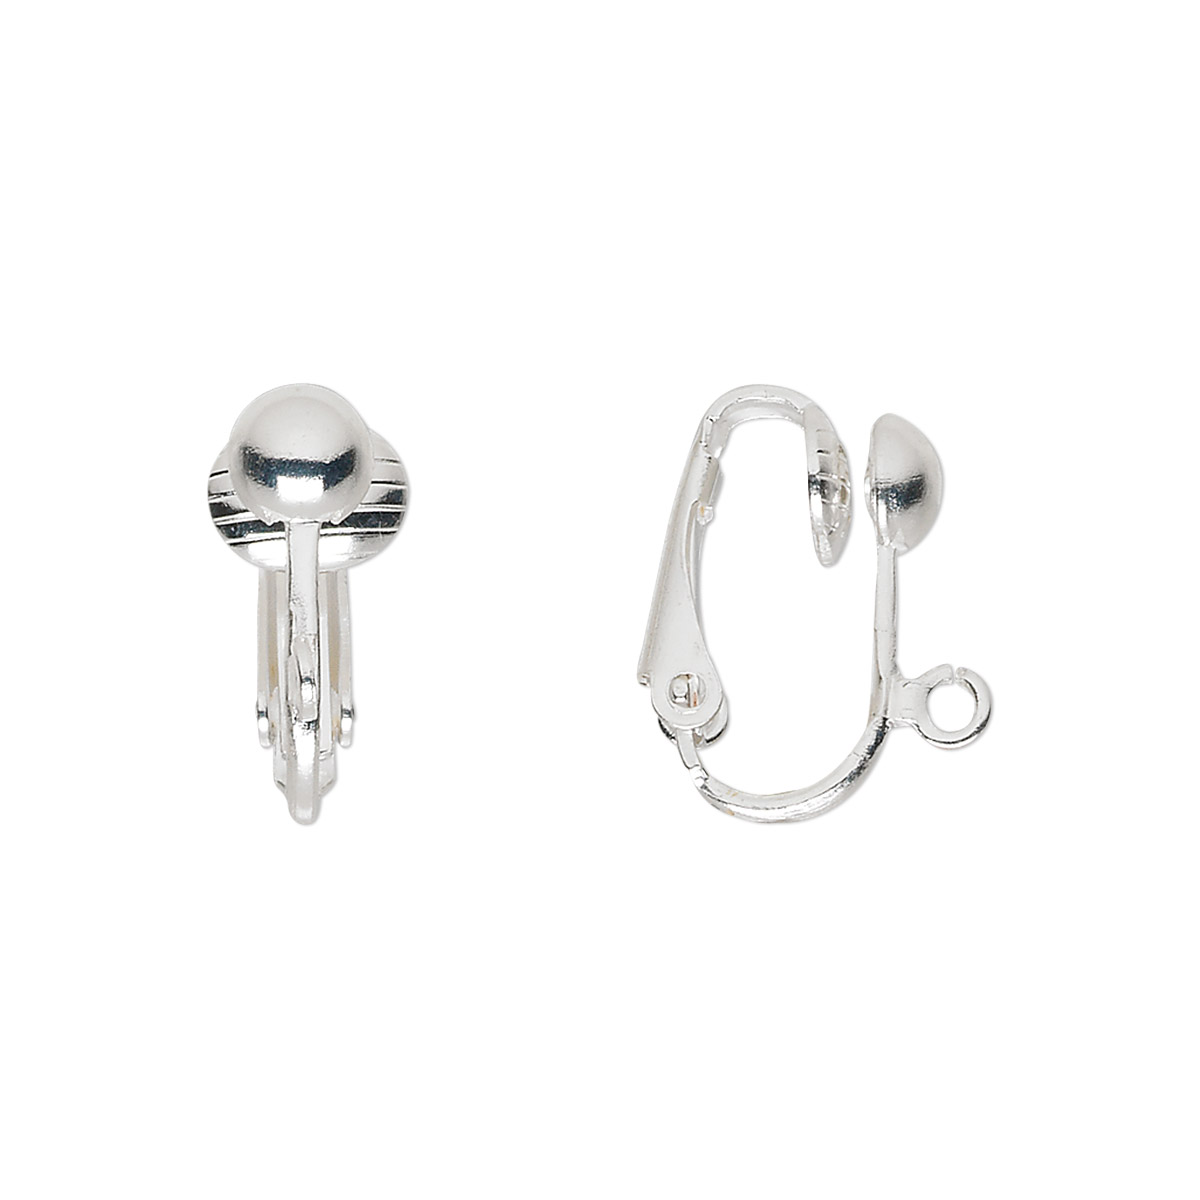 Earring, clip-on, silver-plated steel, 16mm hinged with half ball and ...